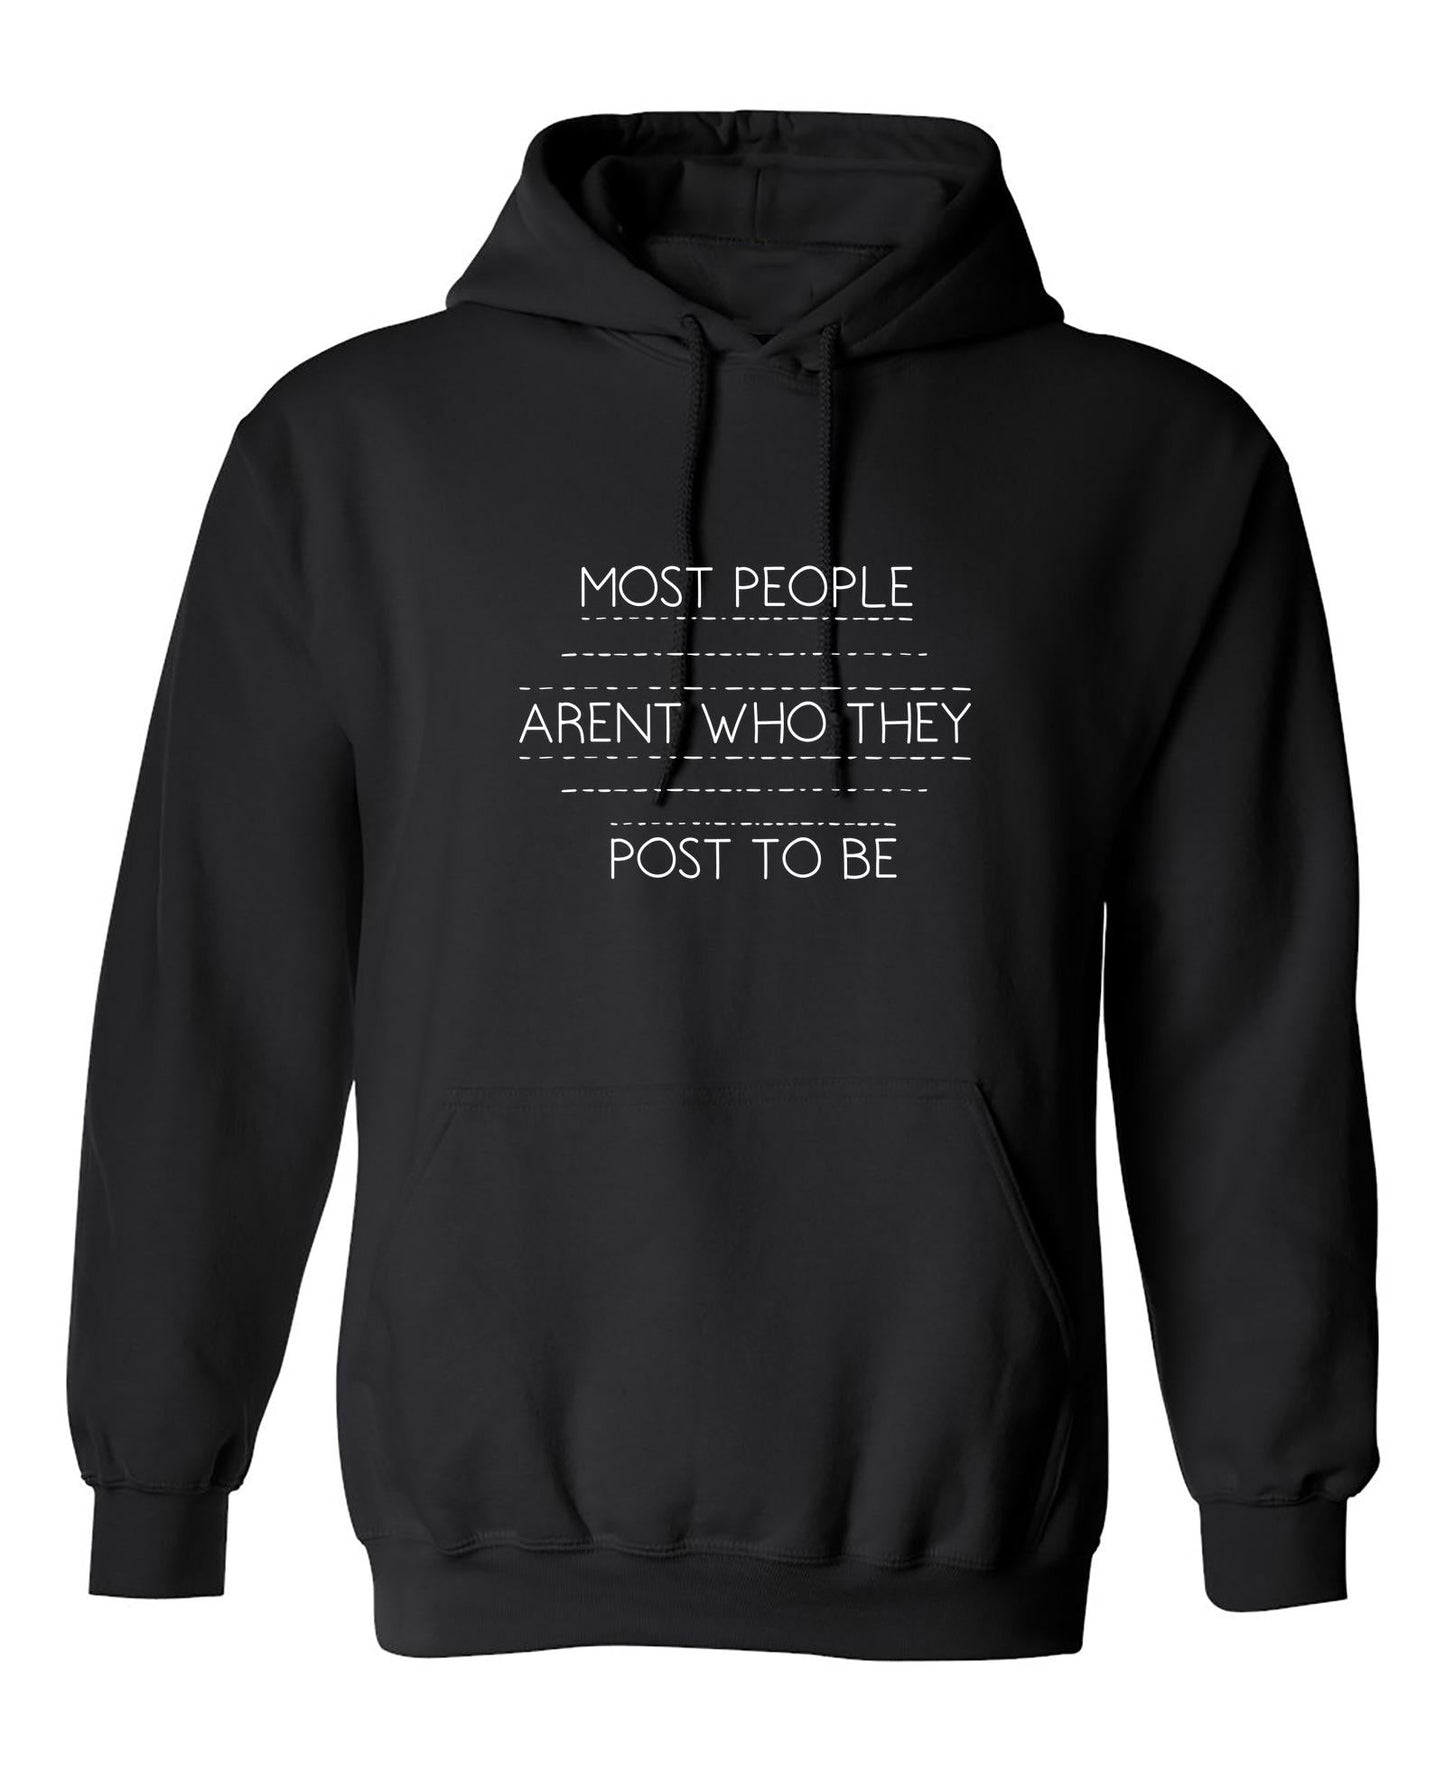 Funny T-Shirts design "Most People Aren't Who They Post To Be"